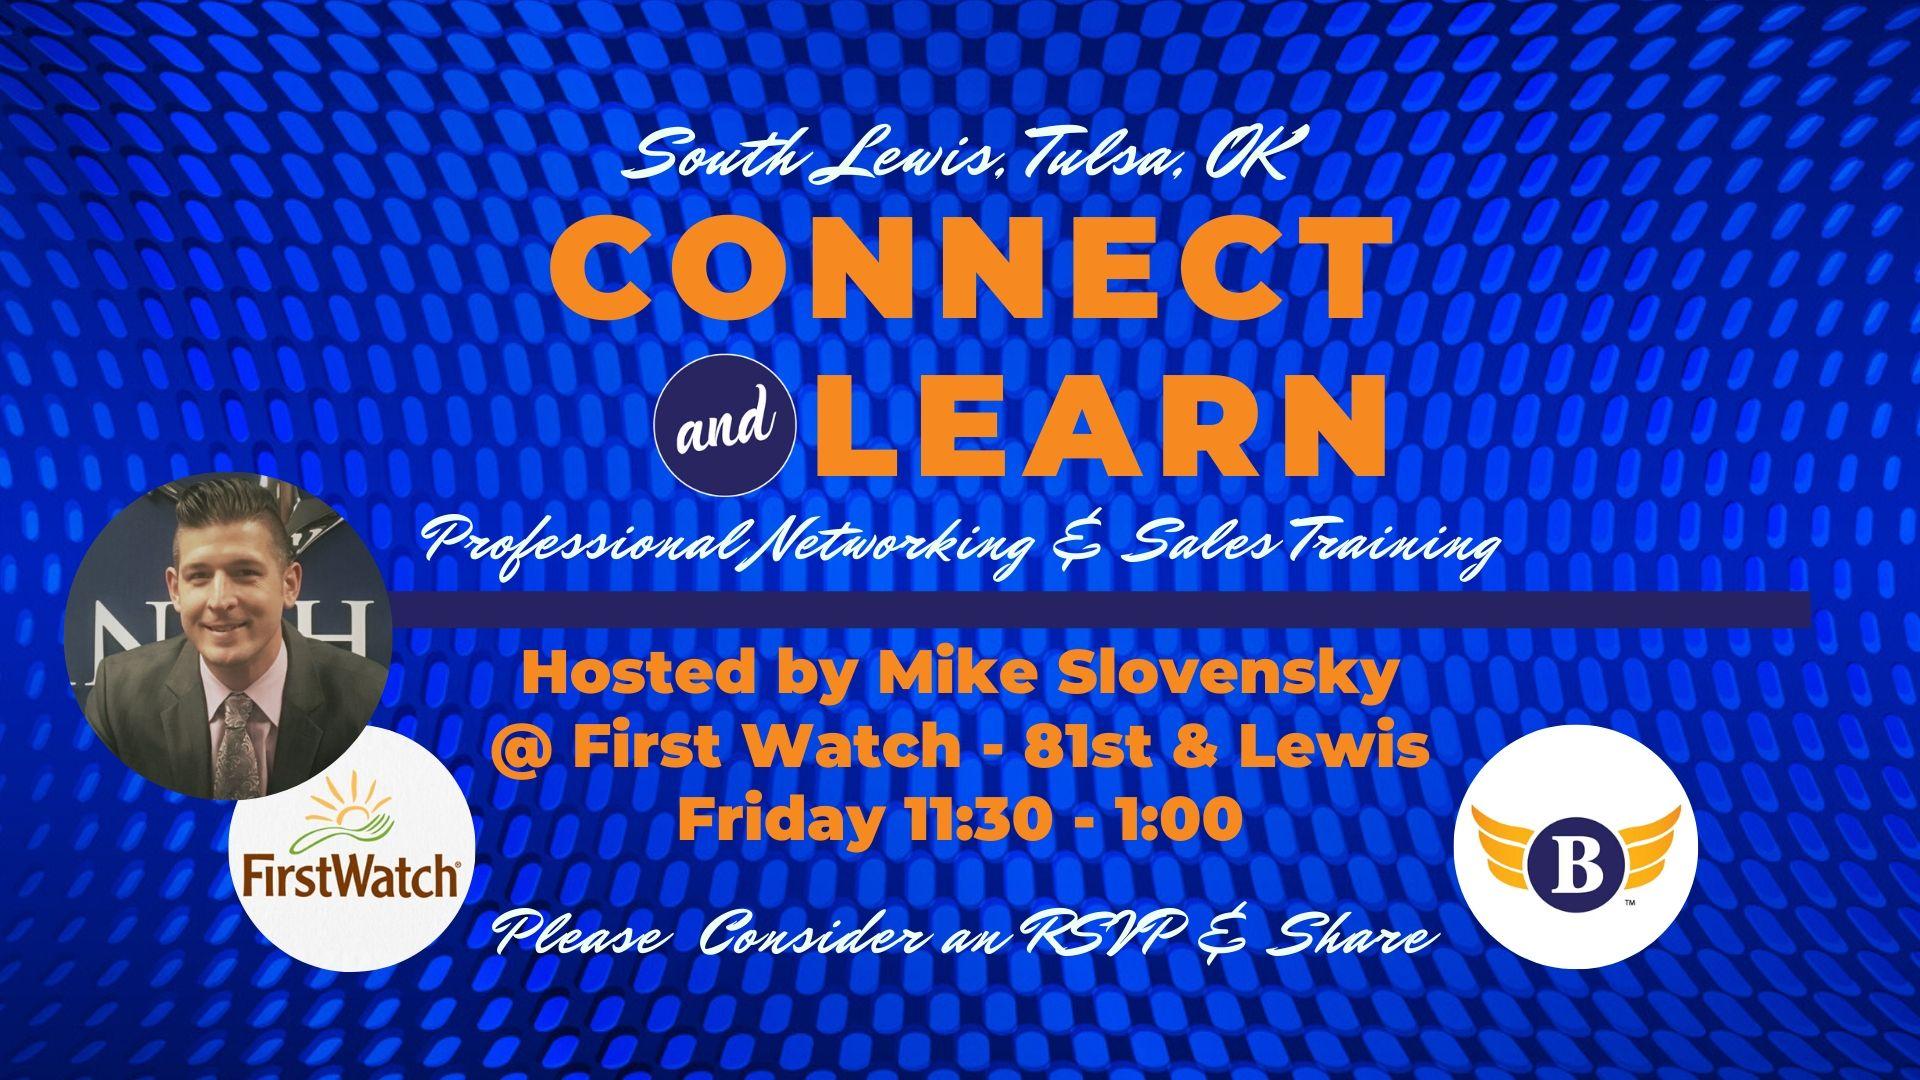 South Lewis, OK : Connect & Learn | Professional Networking & Sales Training